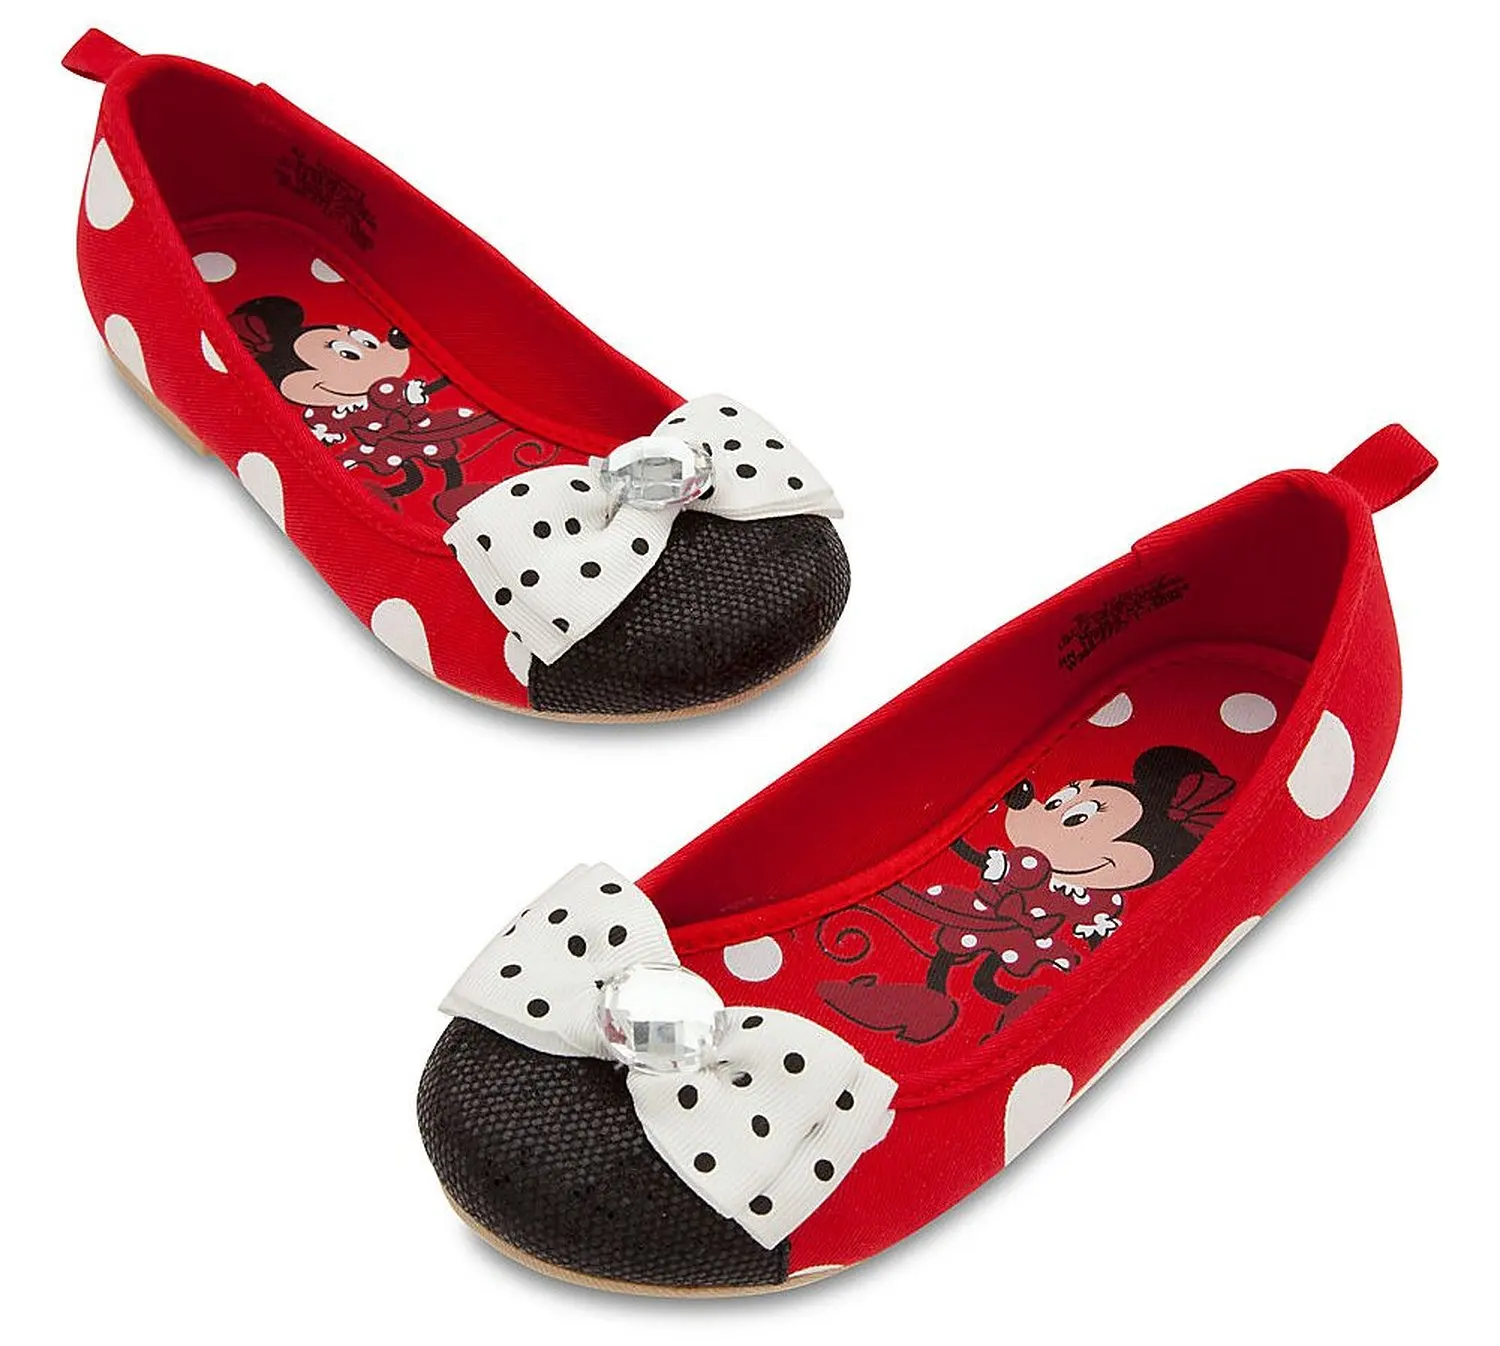 red minnie mouse shoes